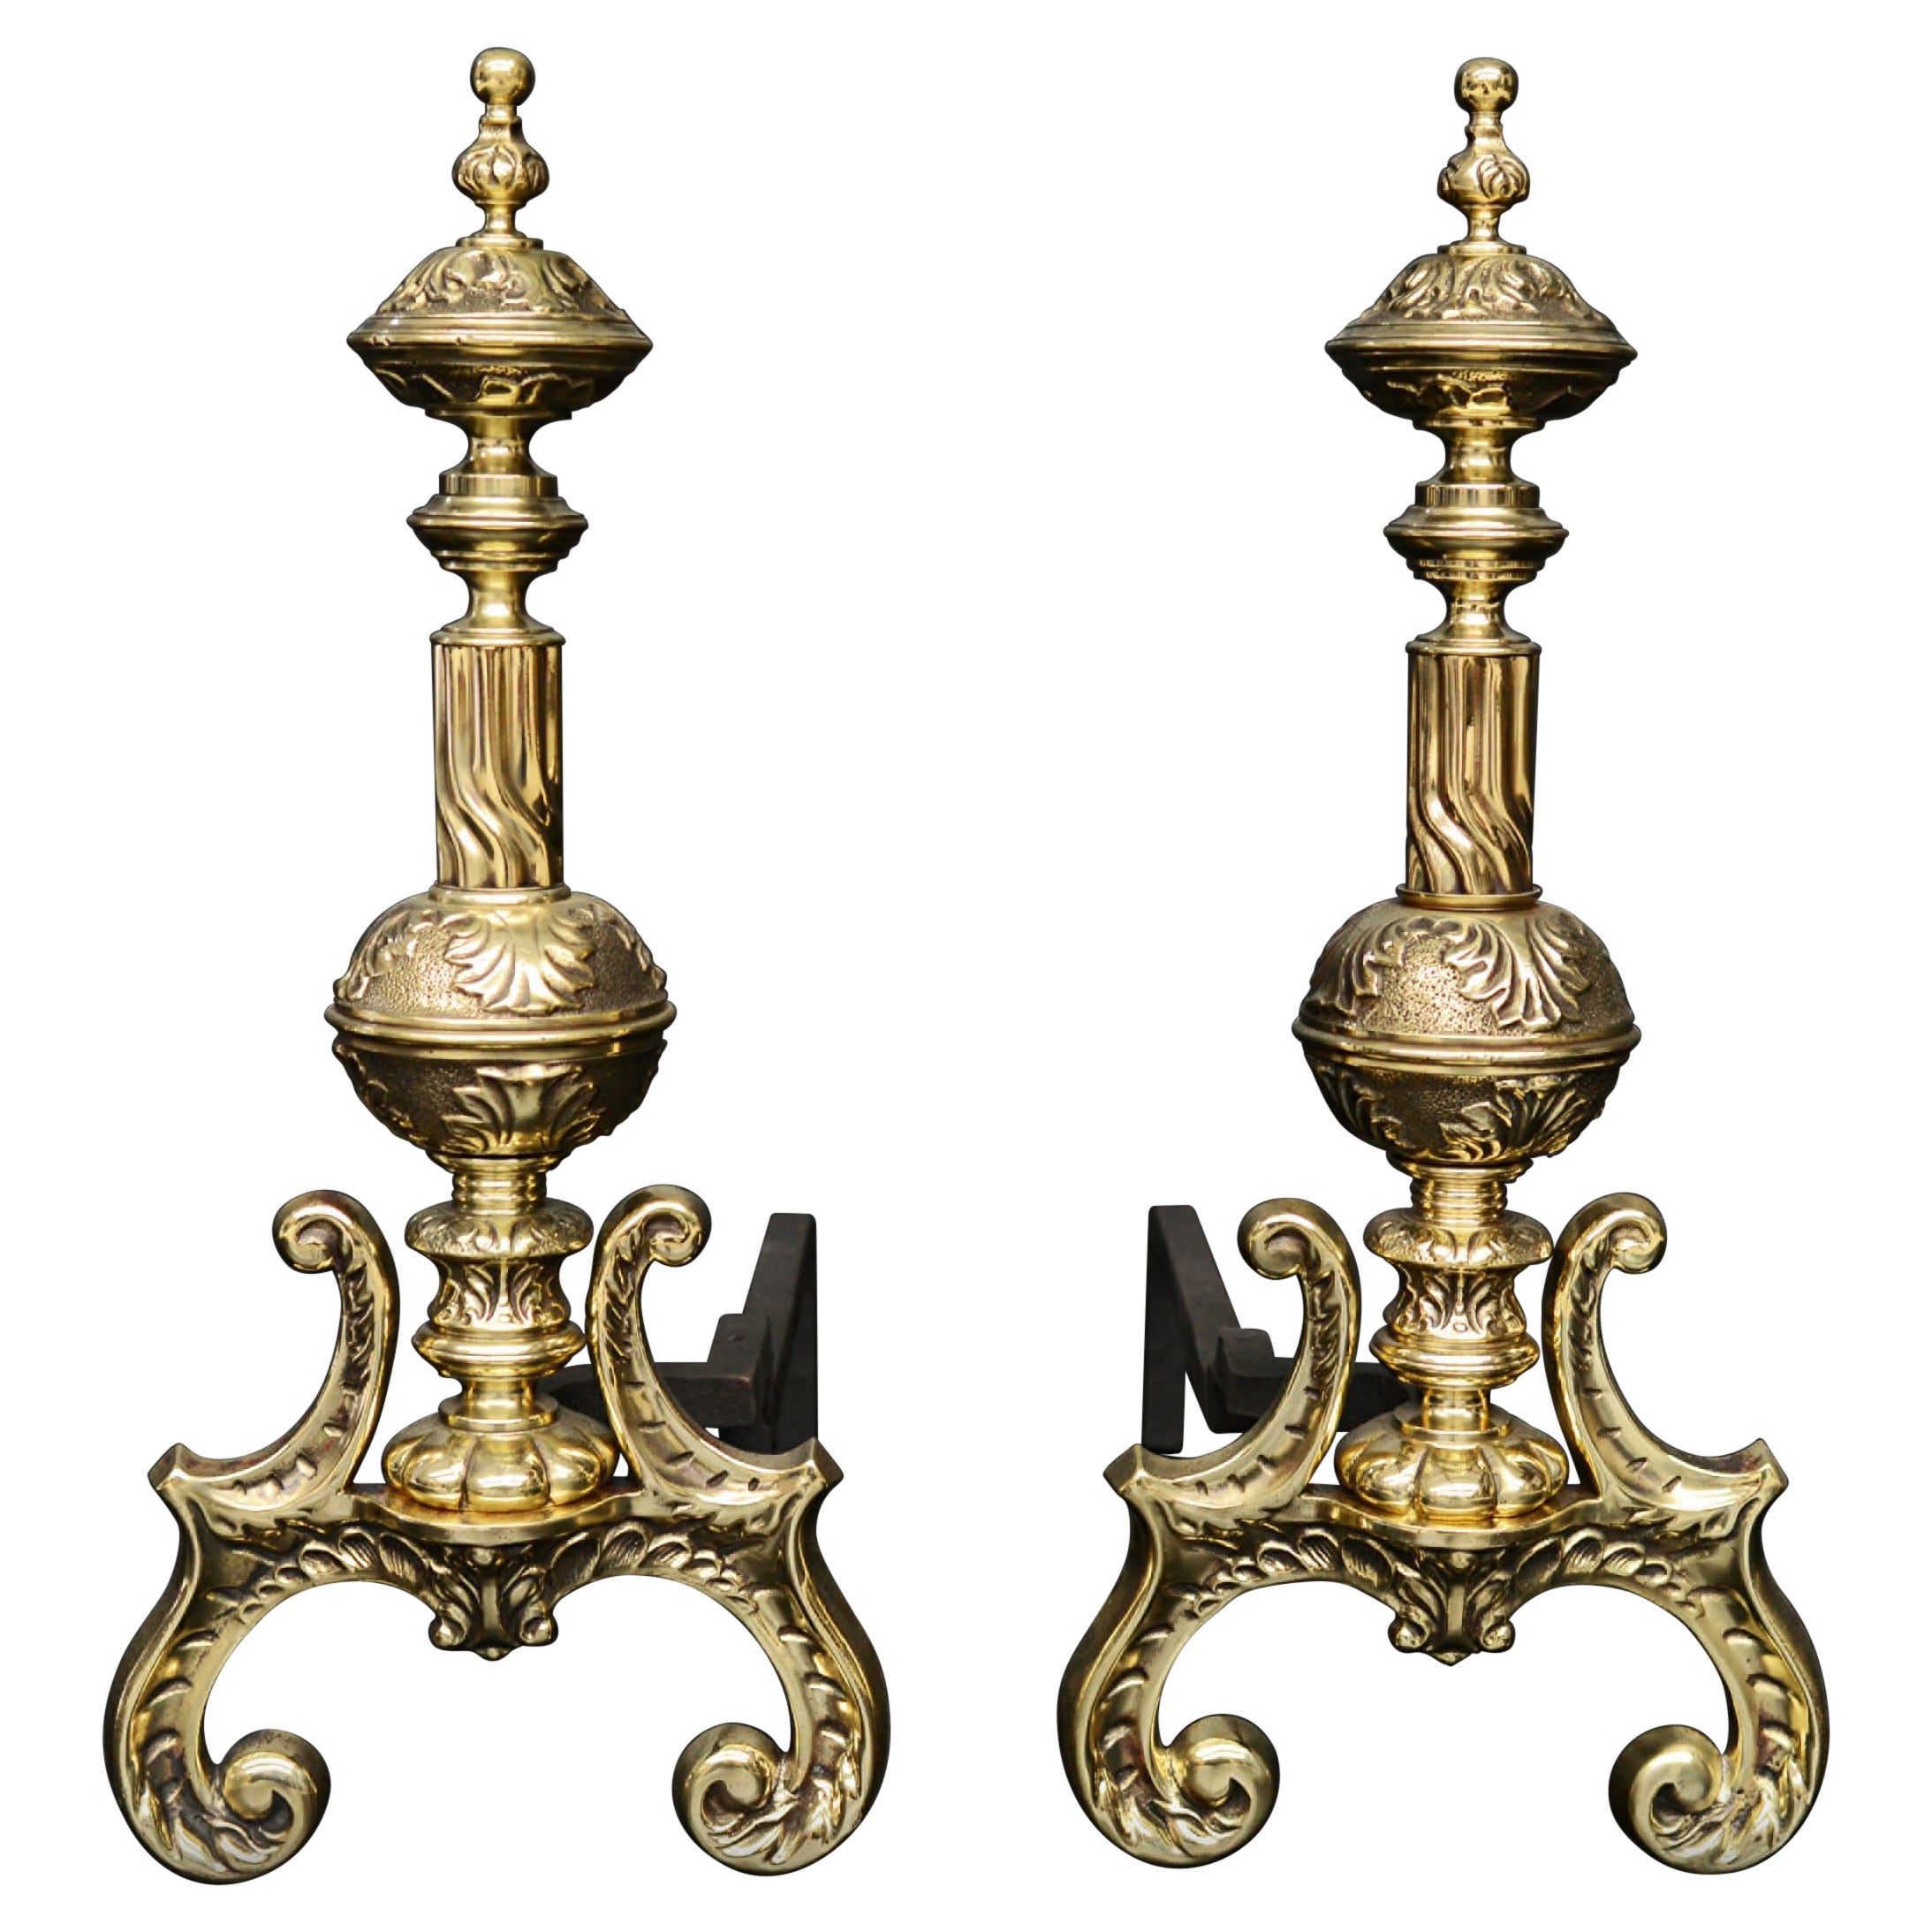 Ornate Pair of Brass Firedogs For Sale